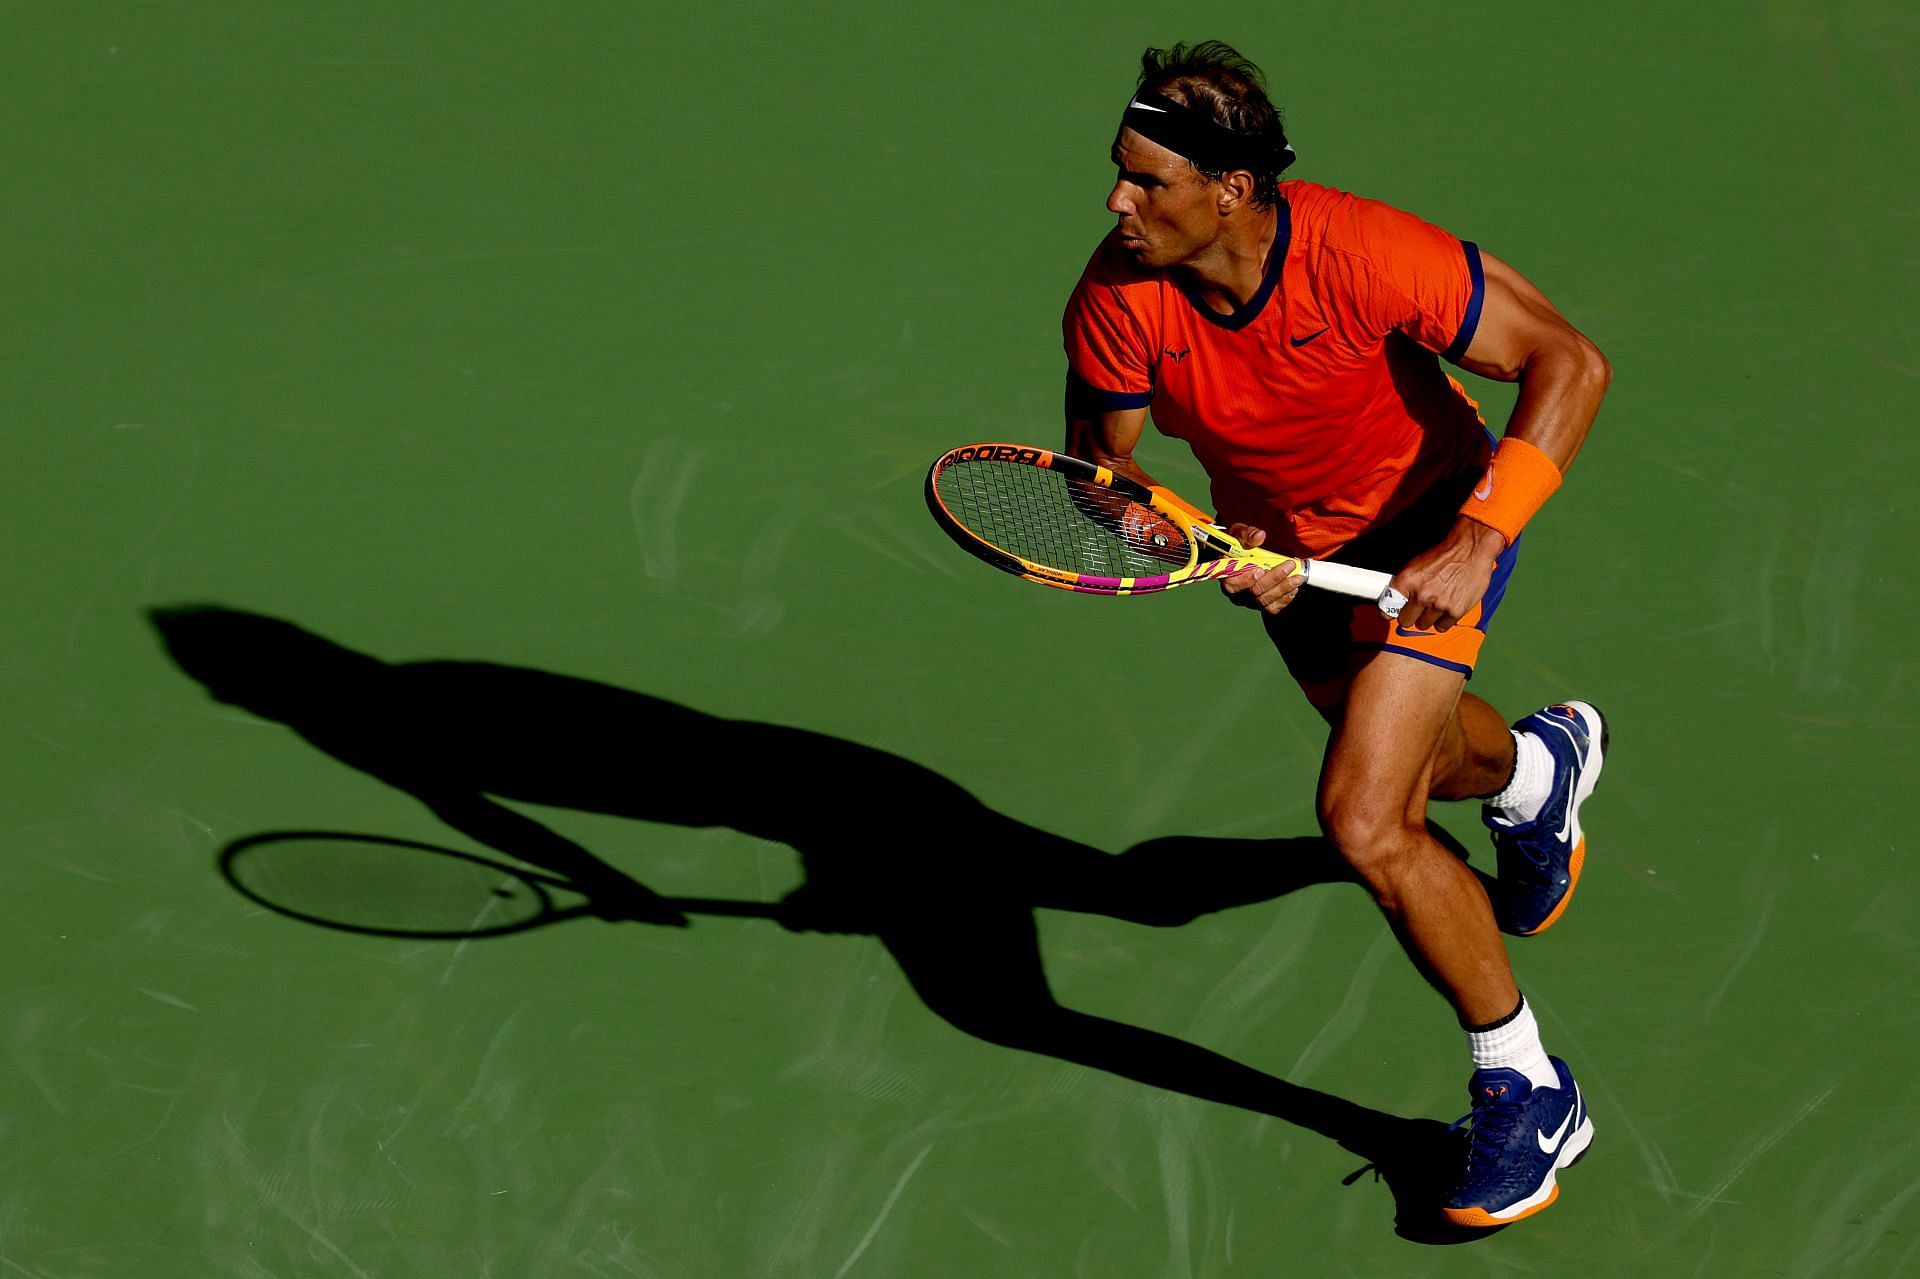 Rafael Nadal will look to make his fourth successive final of the year